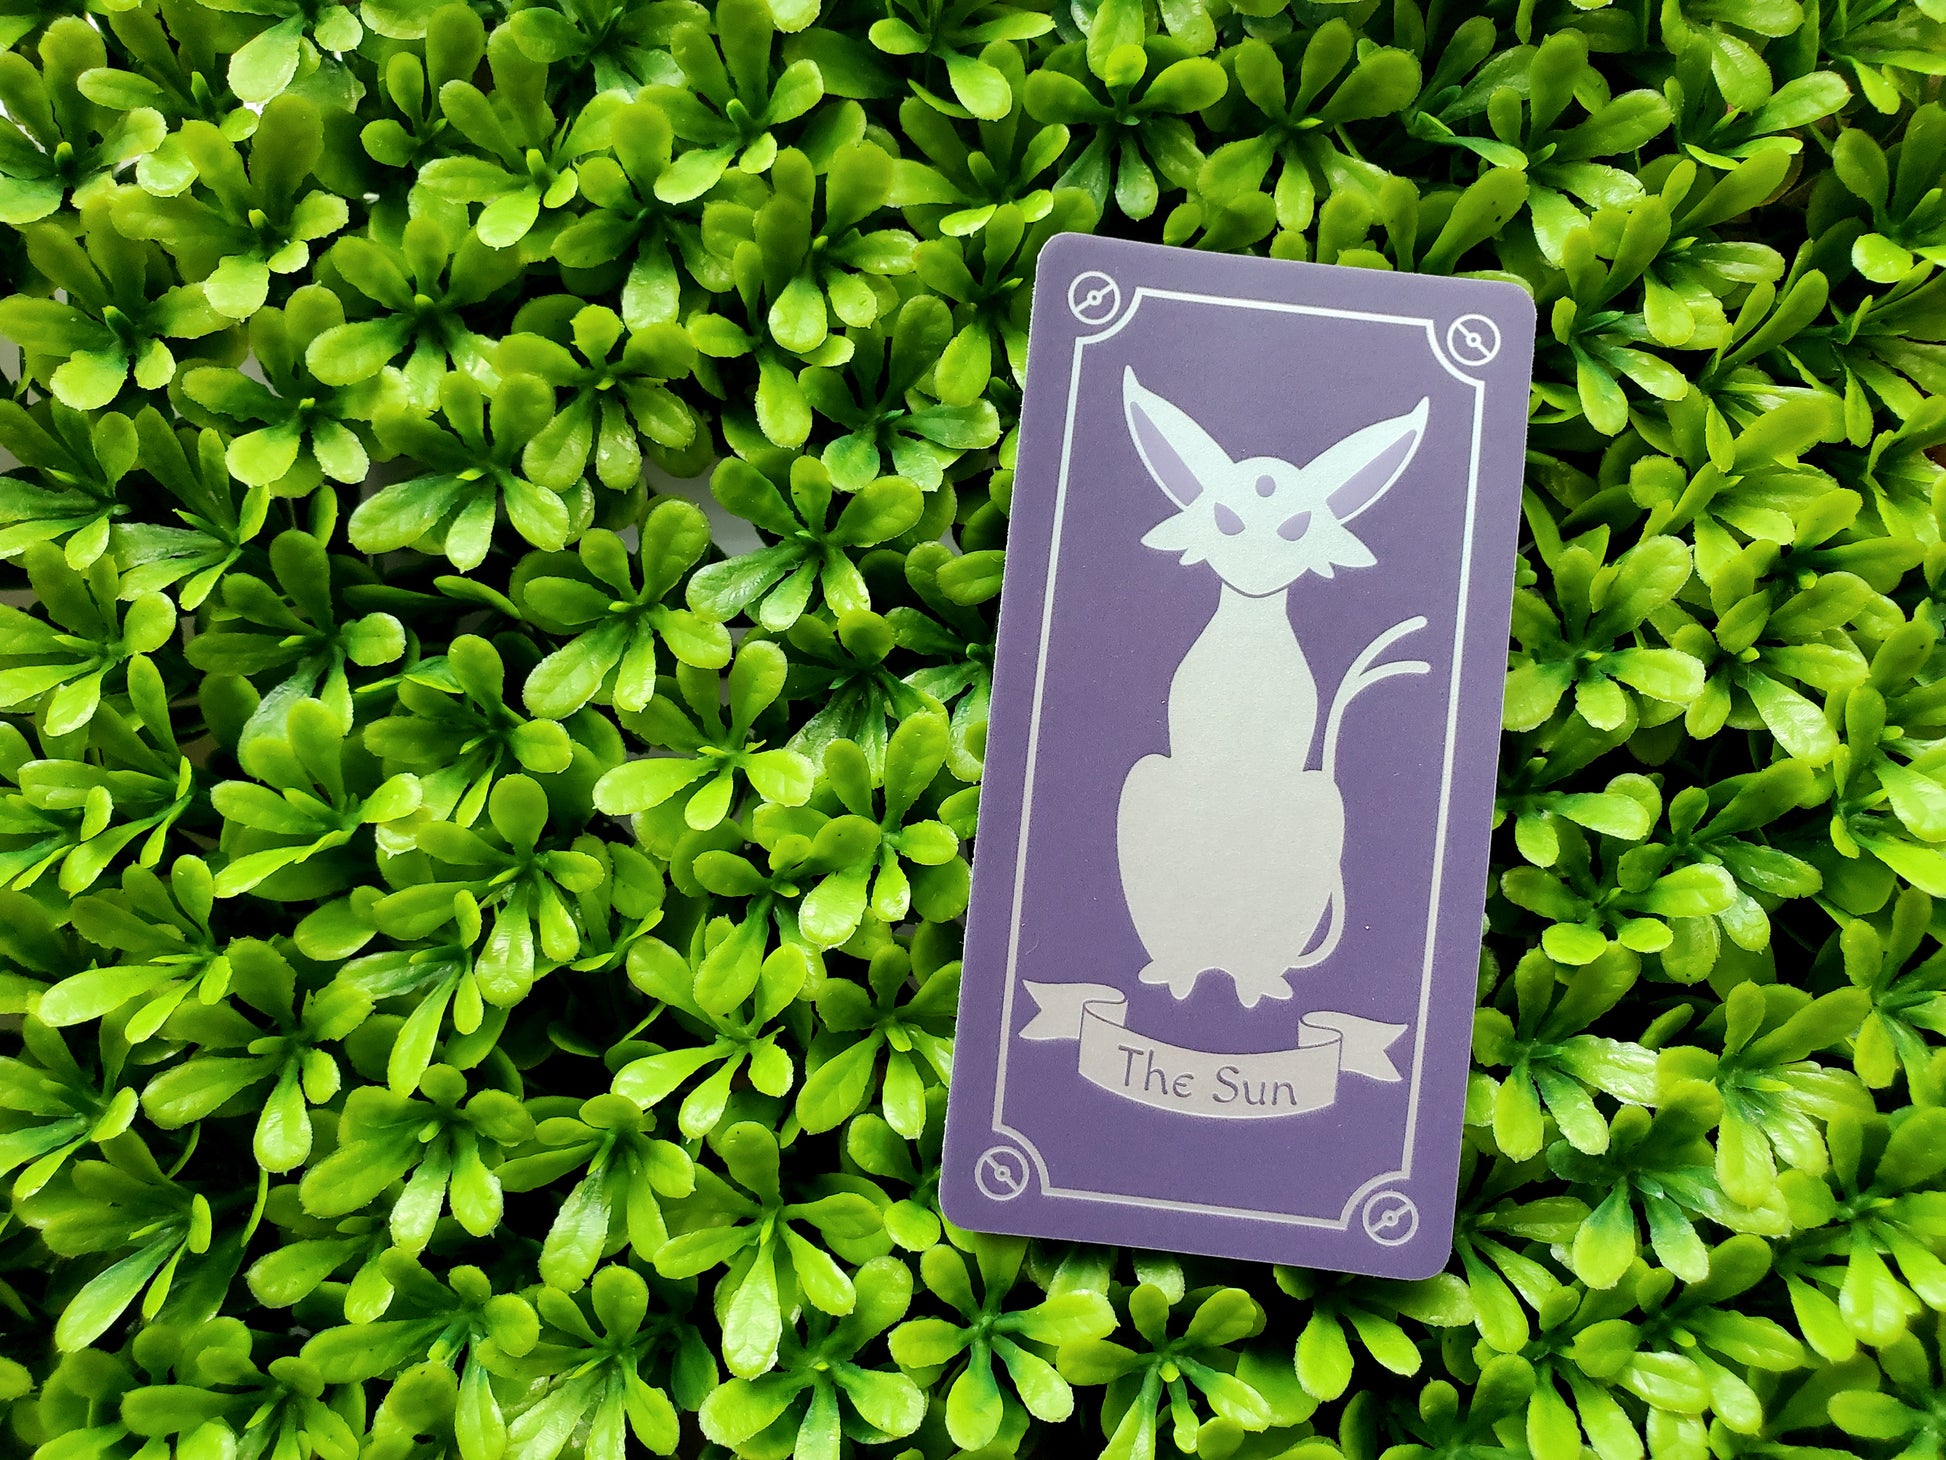 Espeon Tarot Card Inspired Sticker - The Sun - Purple sticker with holographic vaporwave shimmer